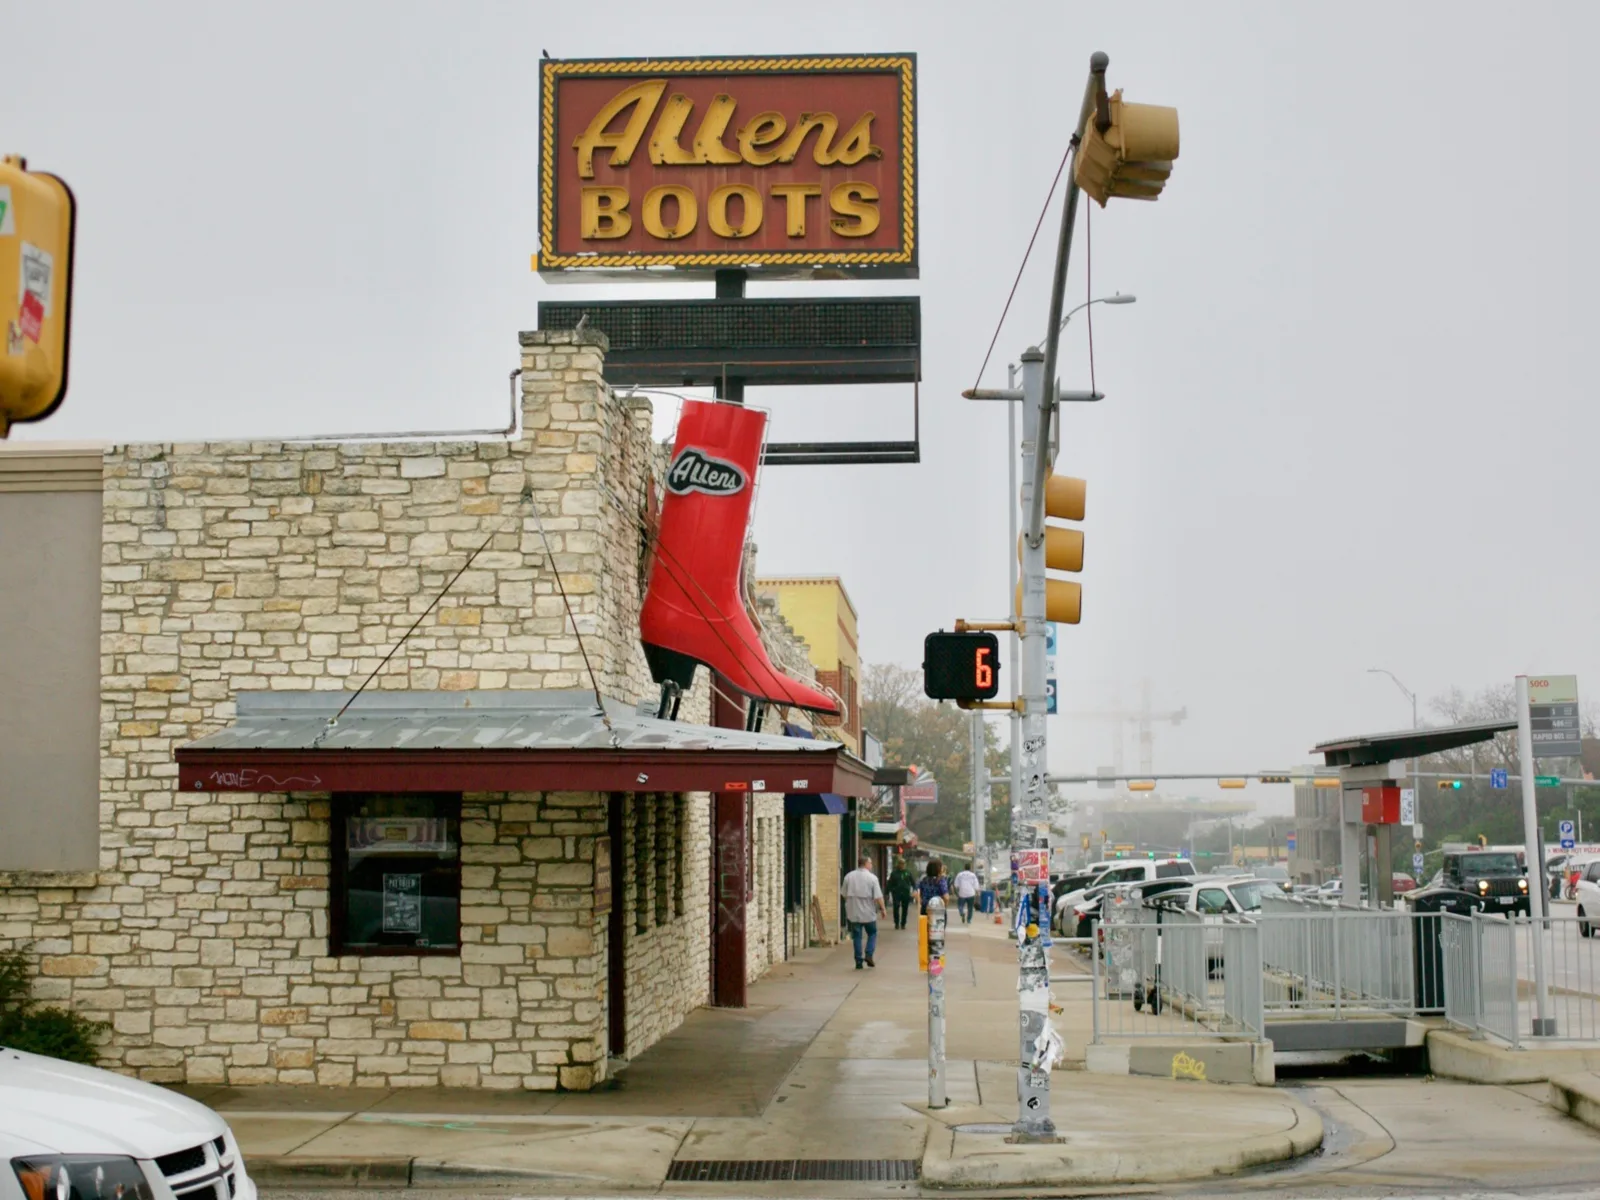 Allens Boots, one of the best things to do in Austin